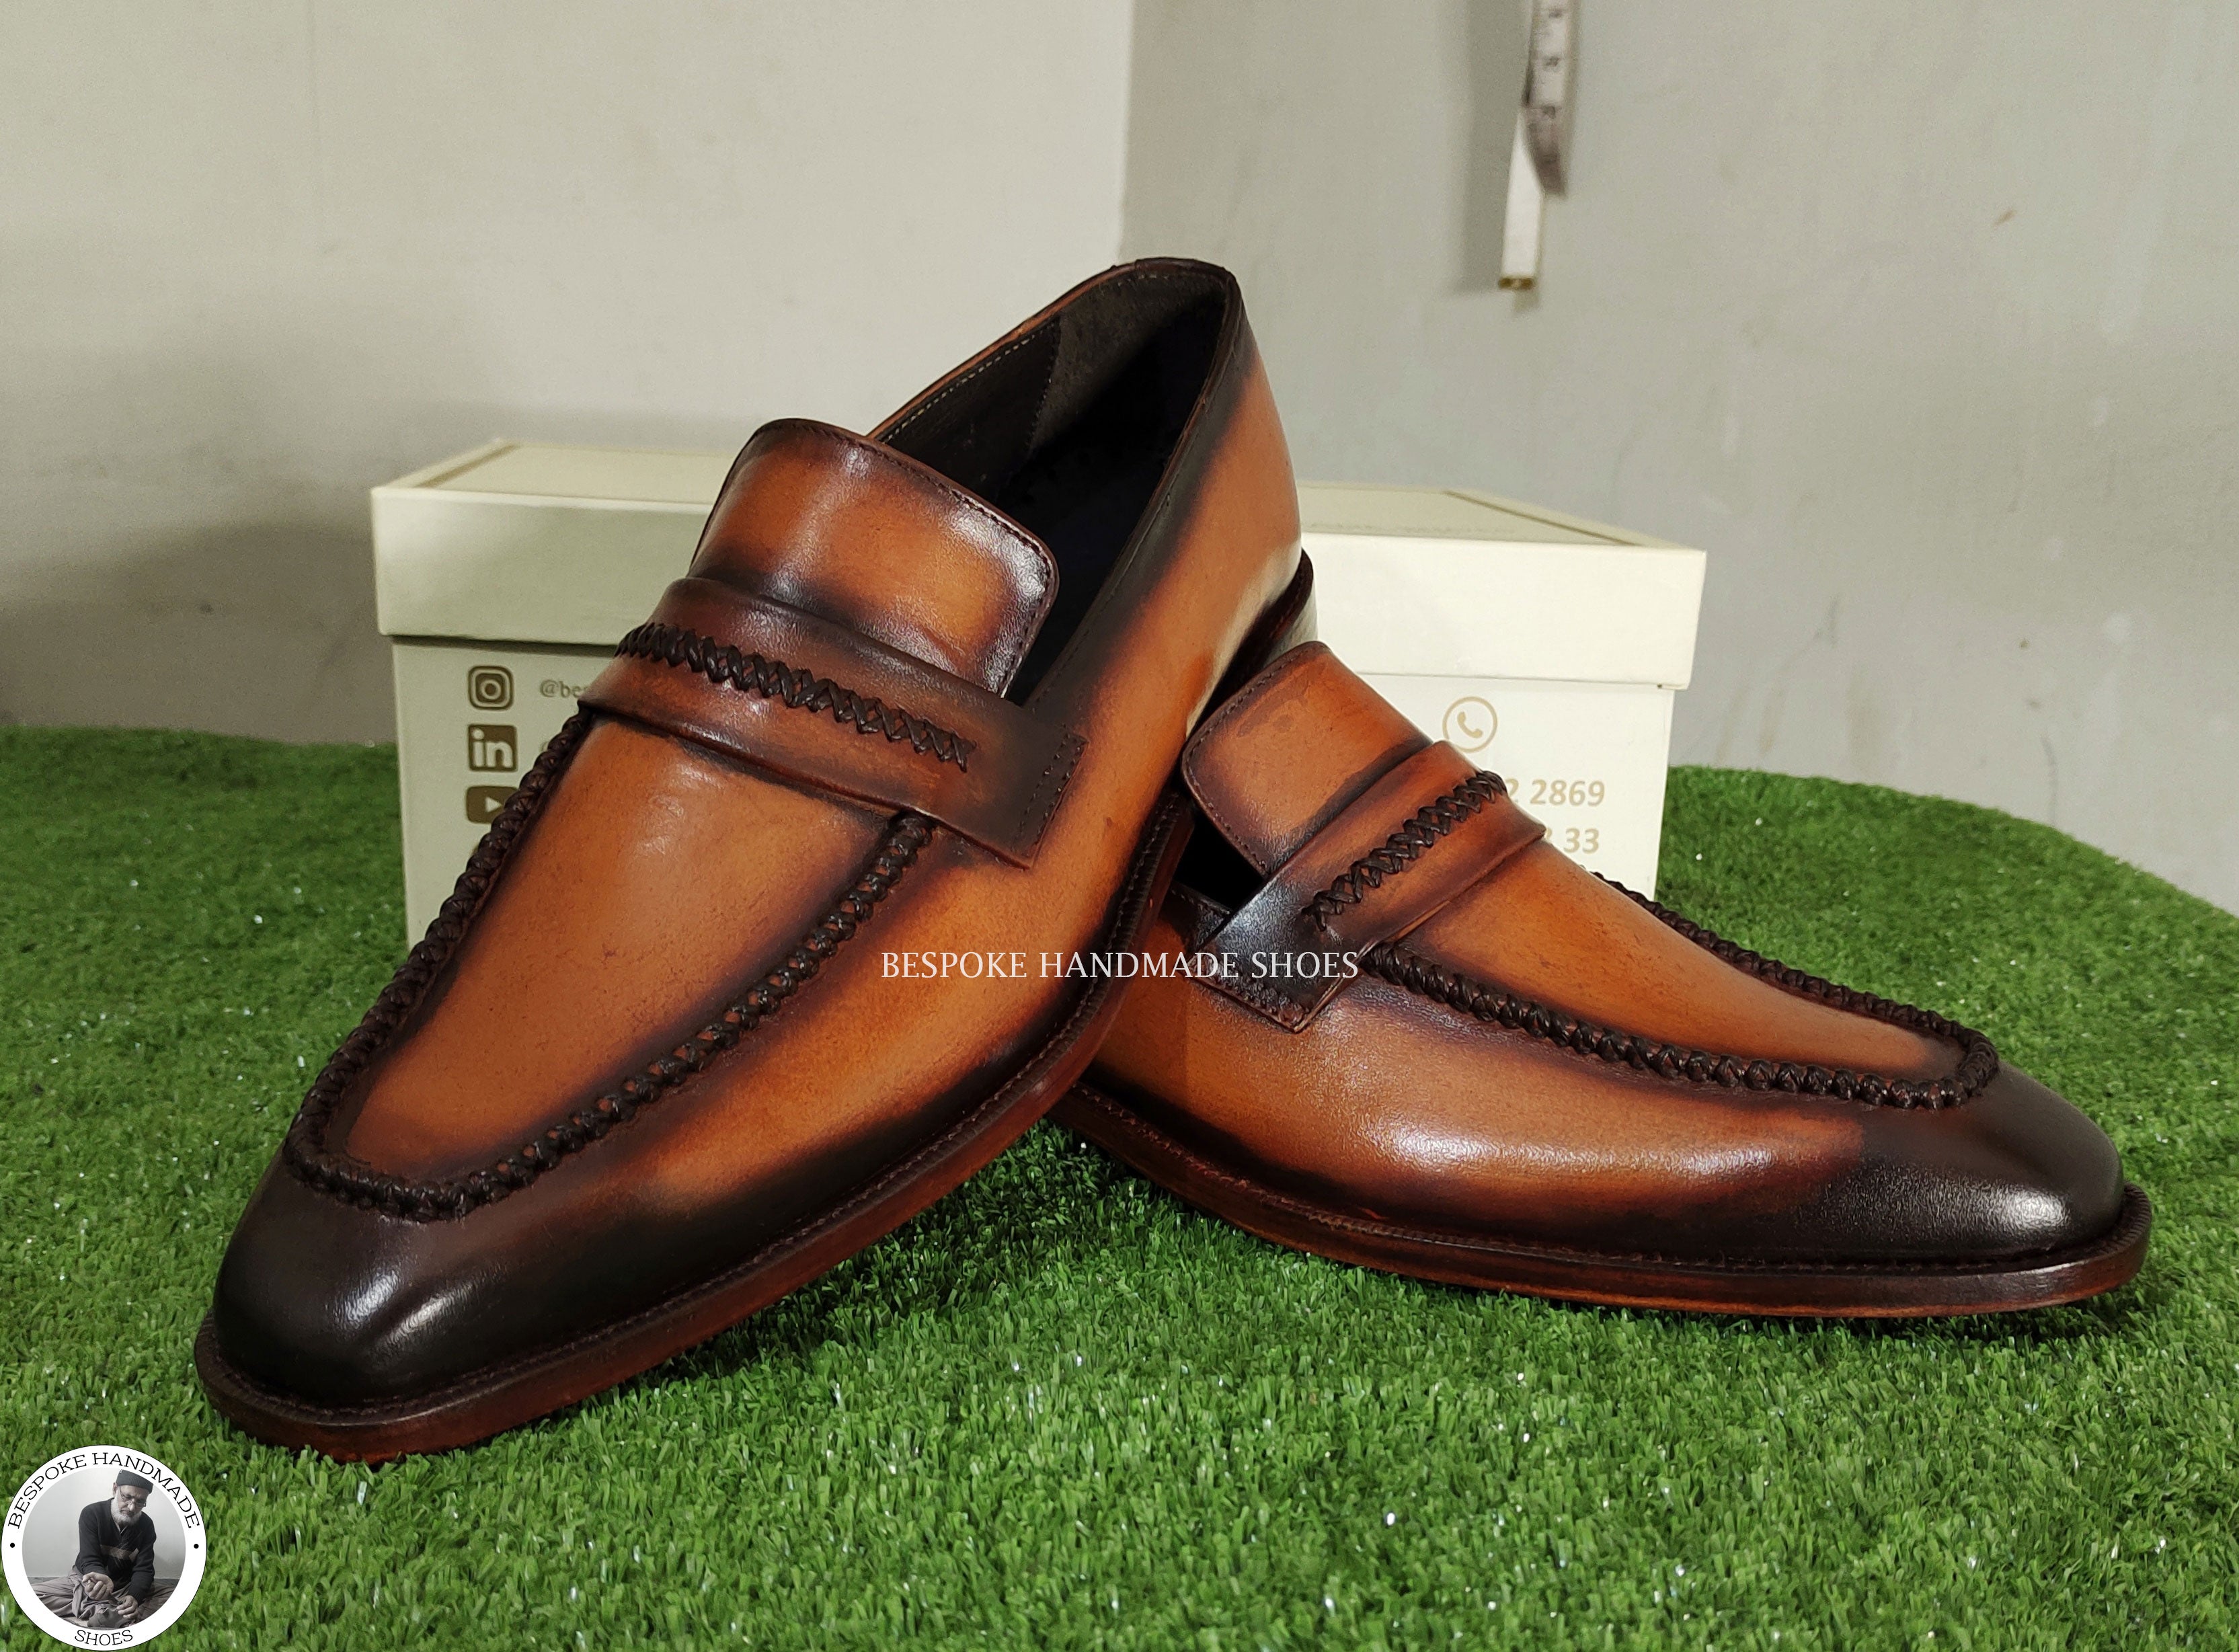 Handmade Men’s Formal Business Comfortable Brown Leather Bit Black Shaded Loafer moccasian Shoes